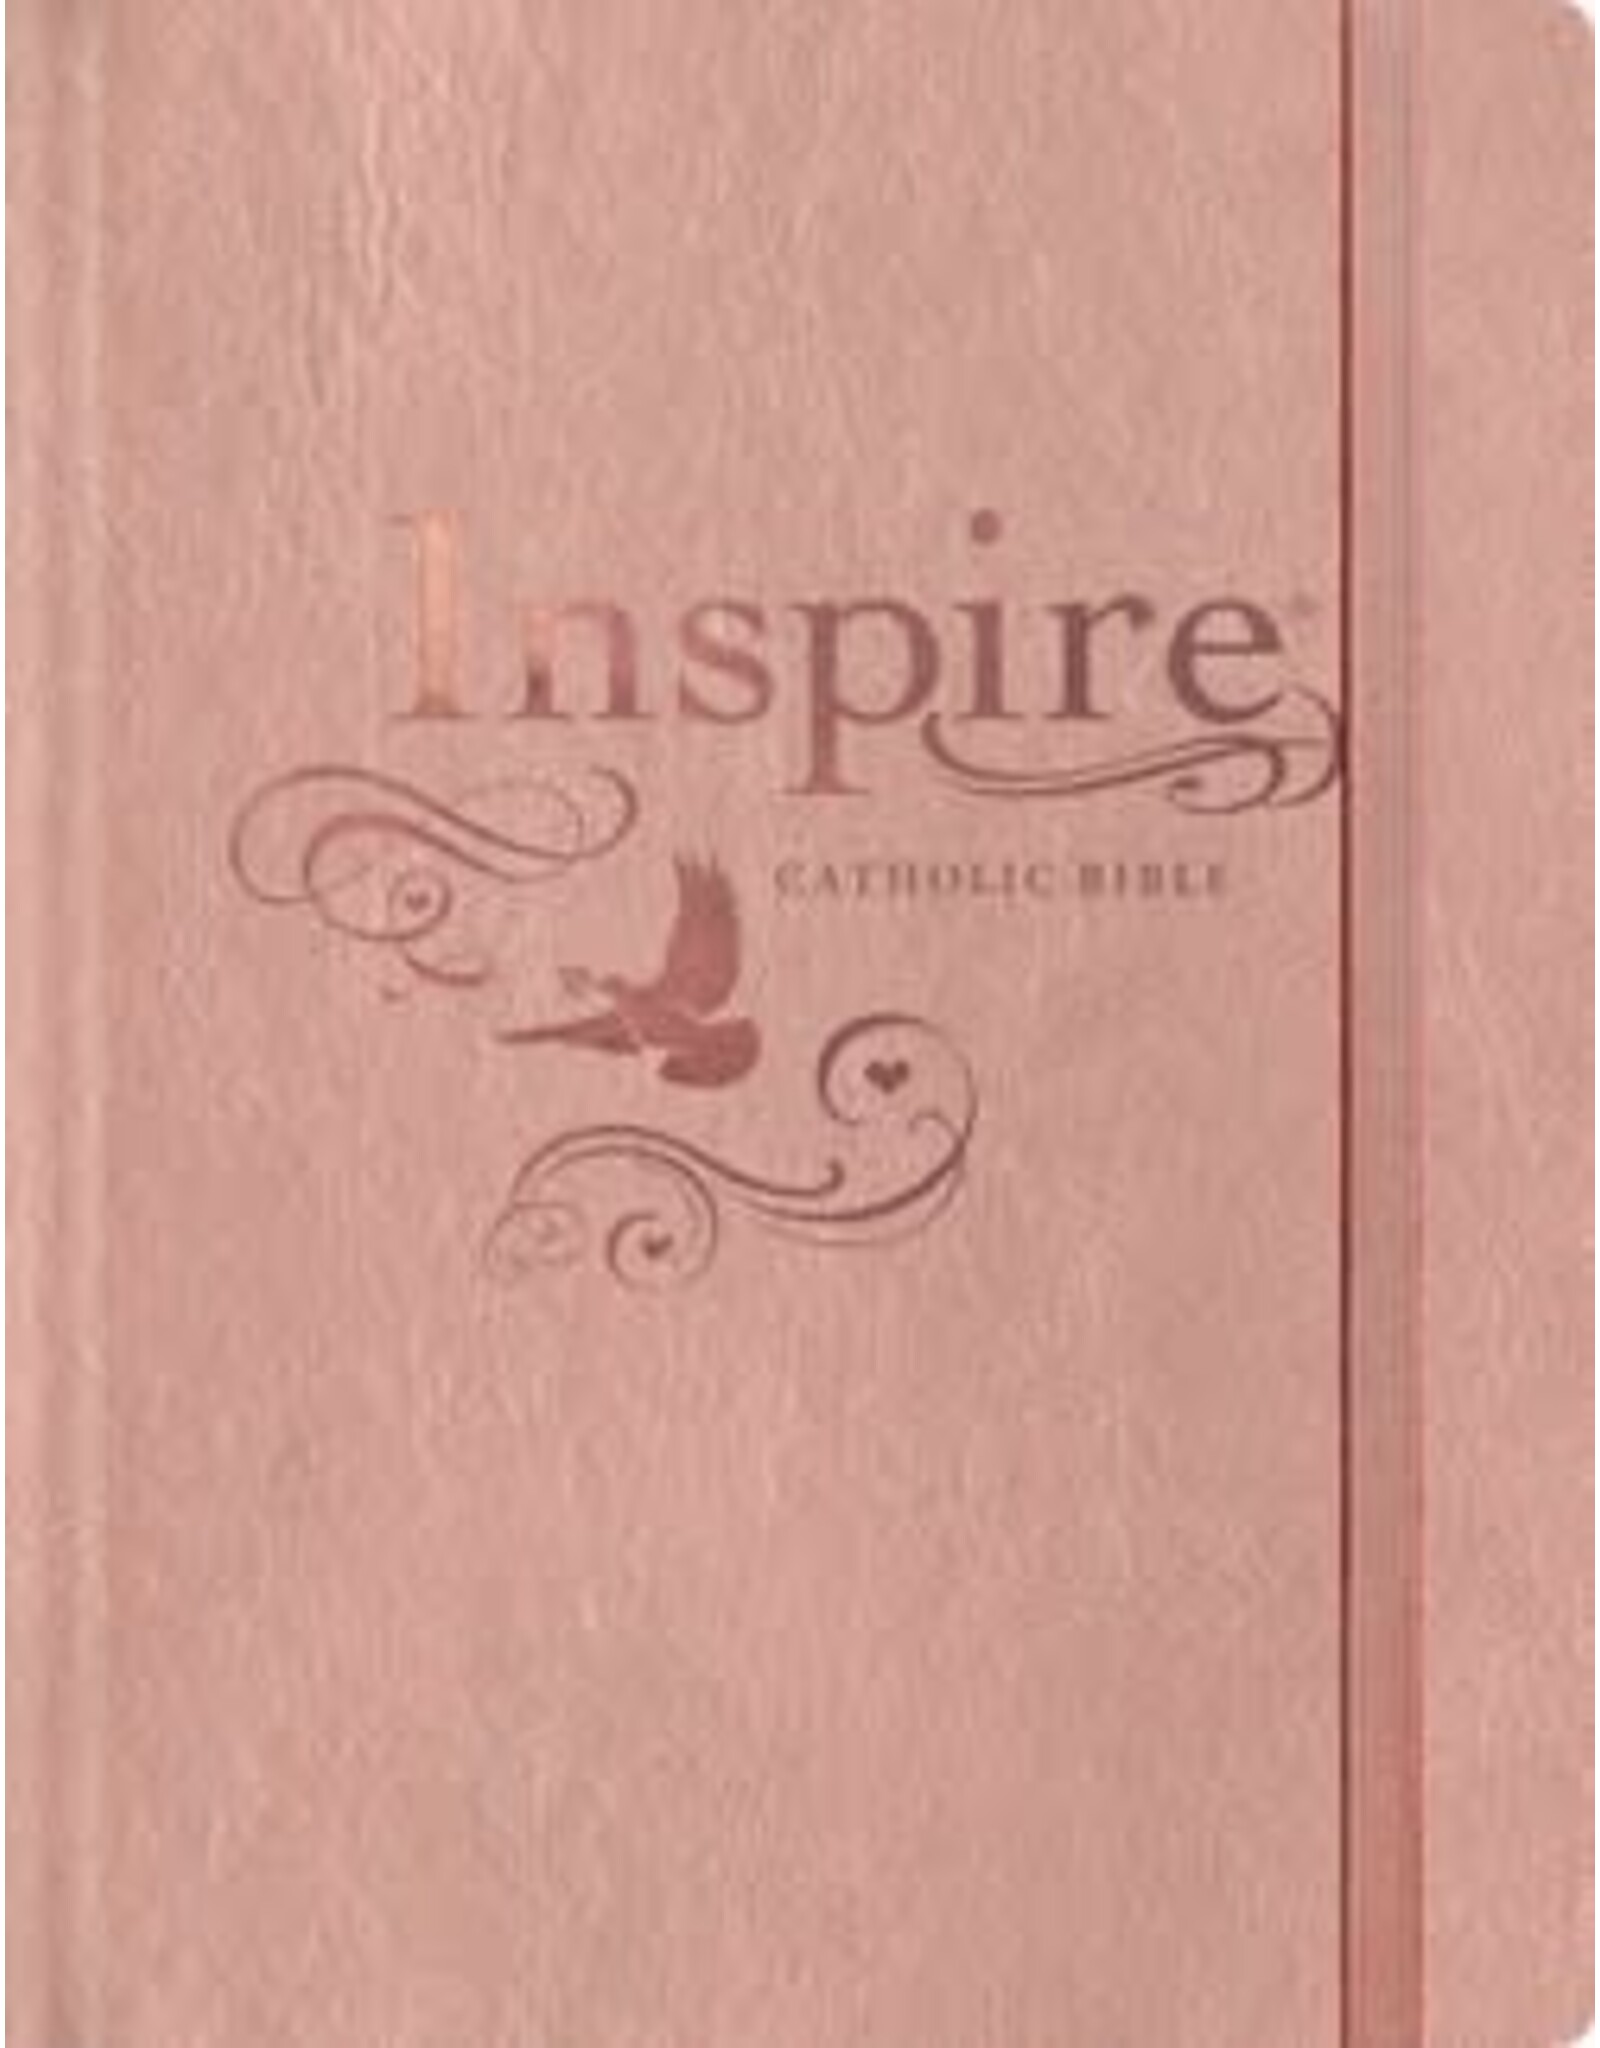 Inspire Catholic Bible: The Bible for Coloring and Creative Journaling - NLT (Hardcover)